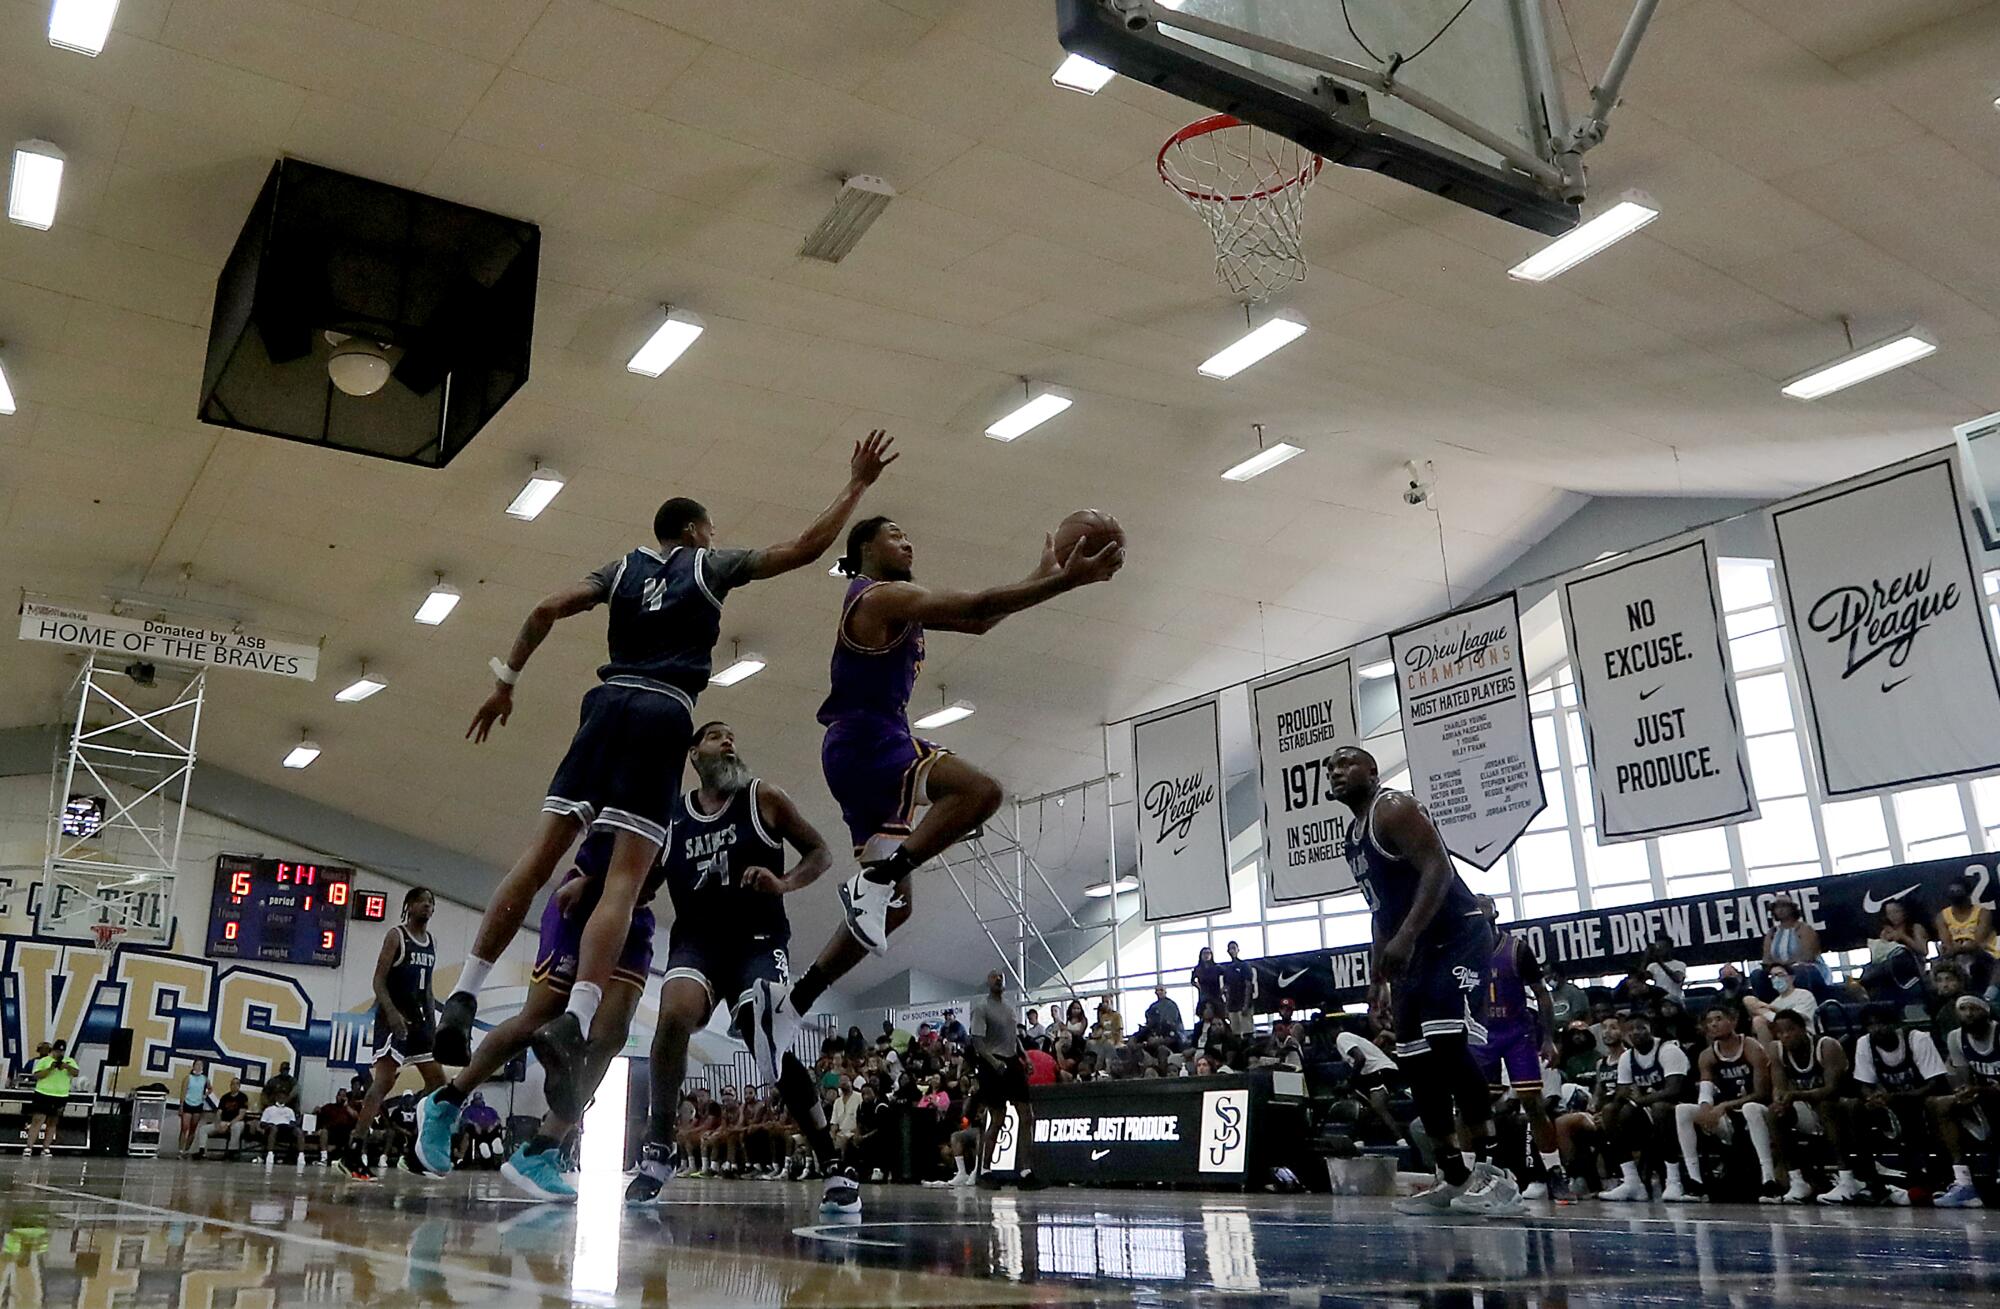 Two teams play a Drew League game at St. John Bosco High on June 26.